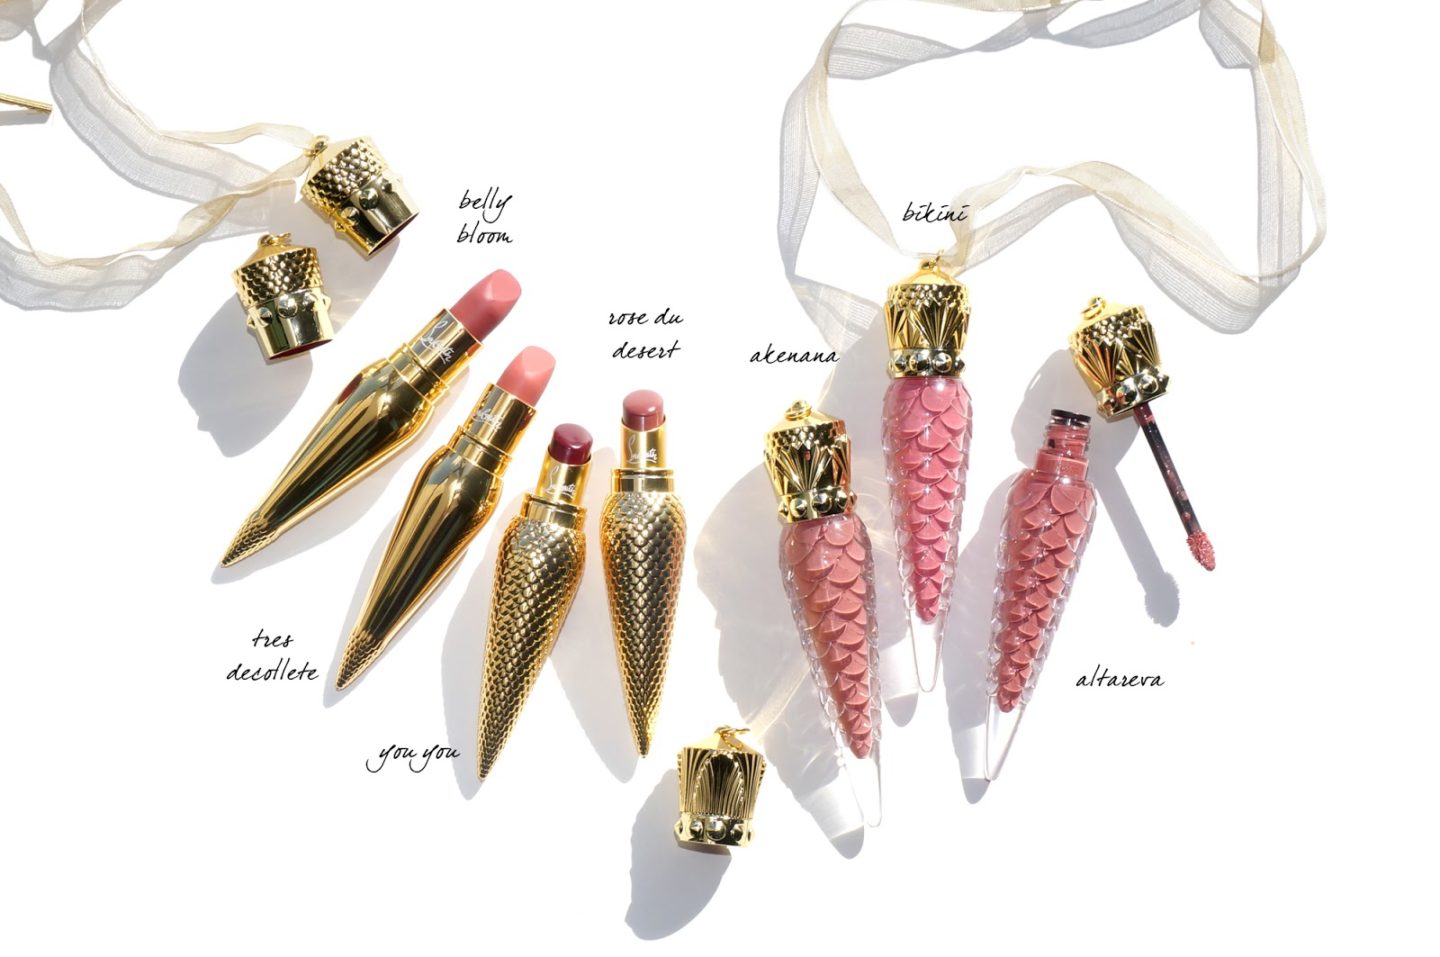 Louboutin Lipstick and Loubilaque Review - The Beauty Look Book